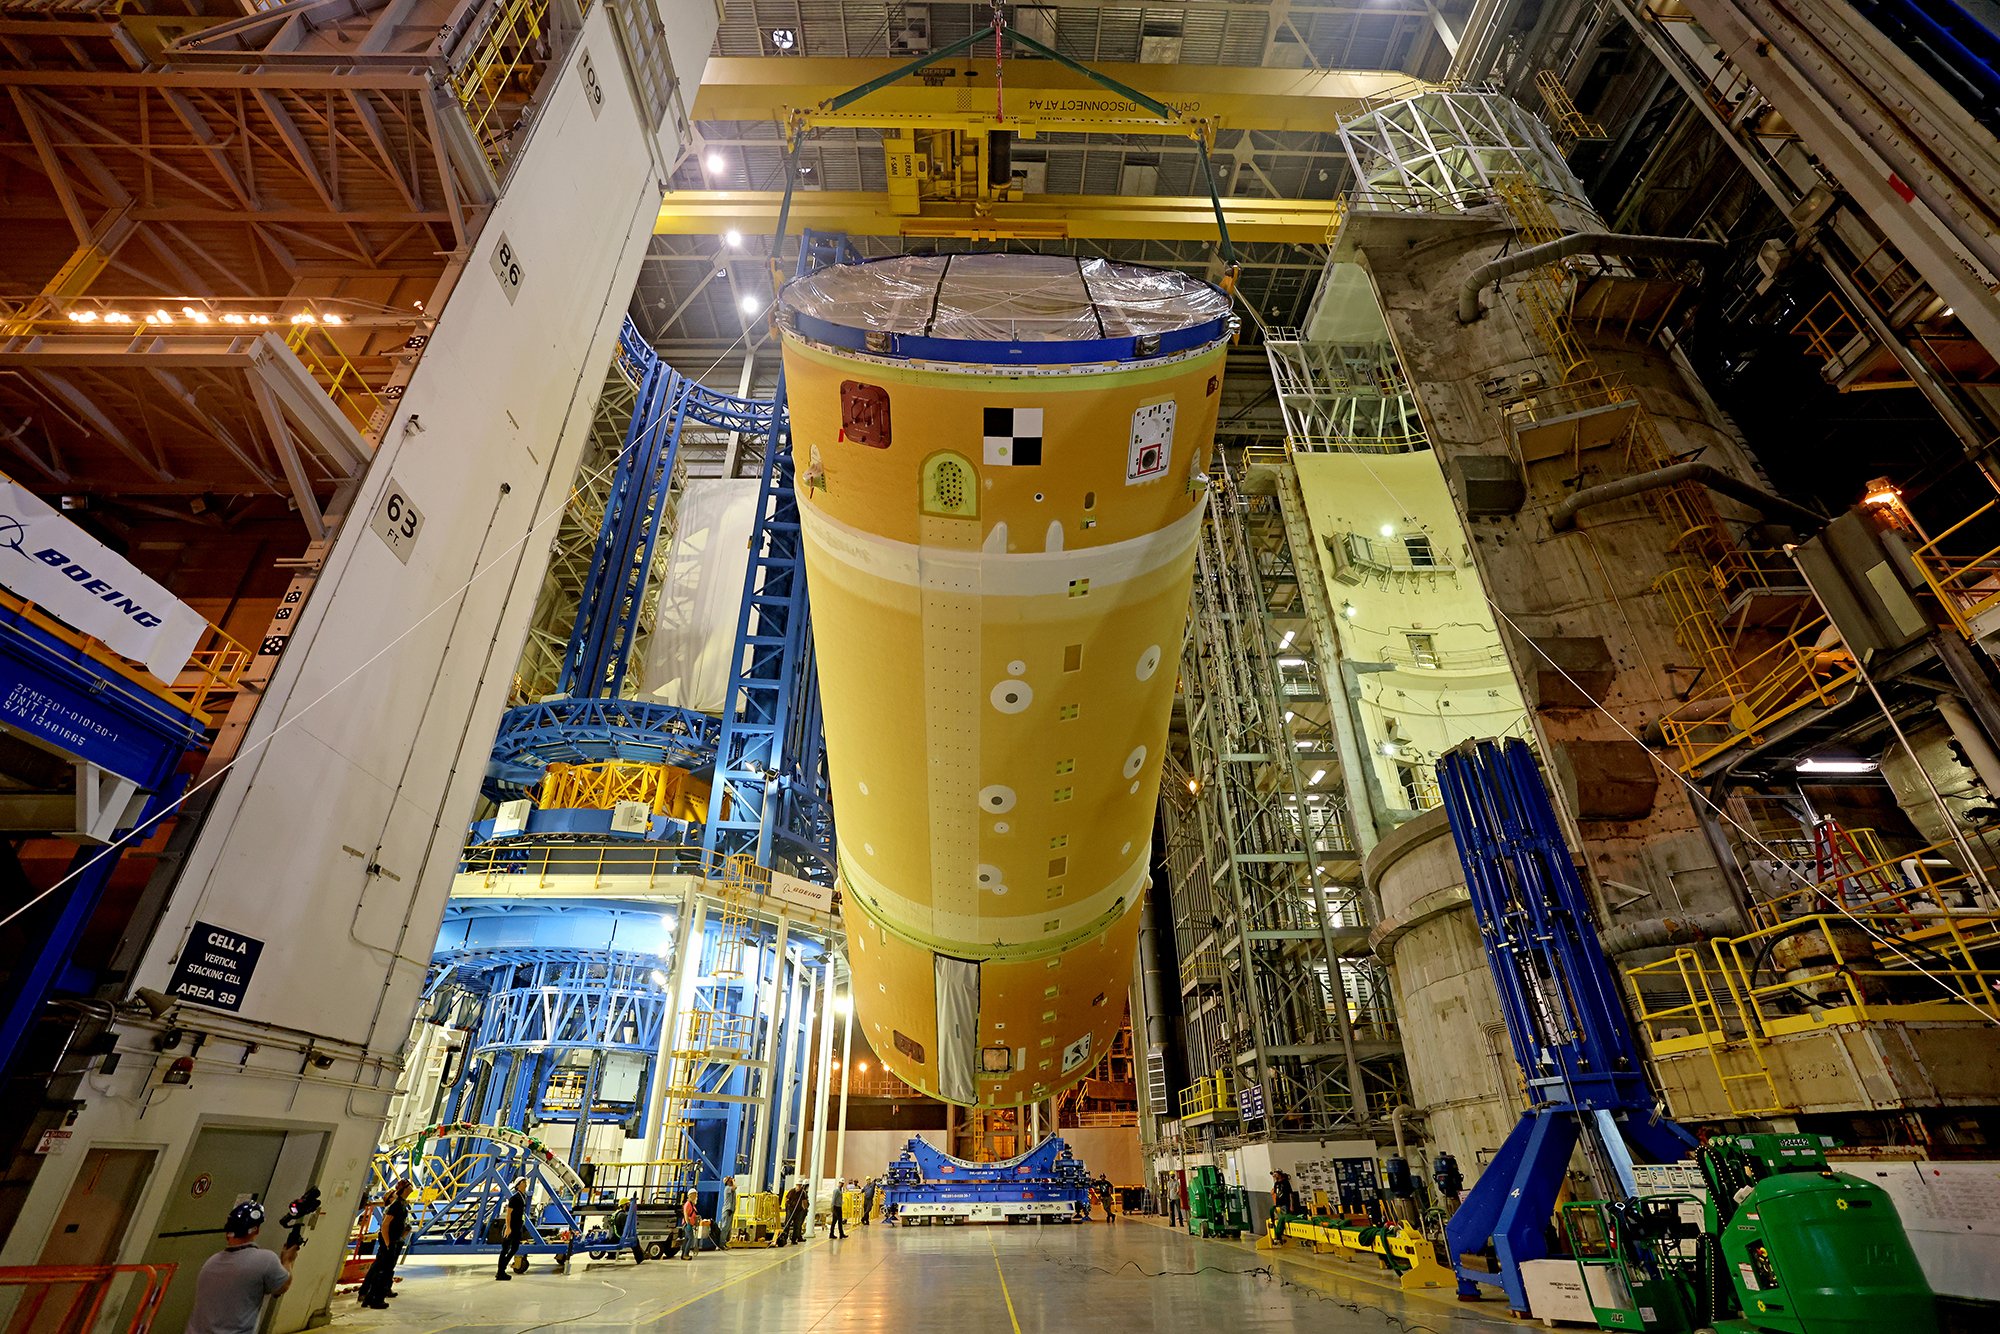 Boeing joining the upper part of the SLS rocket